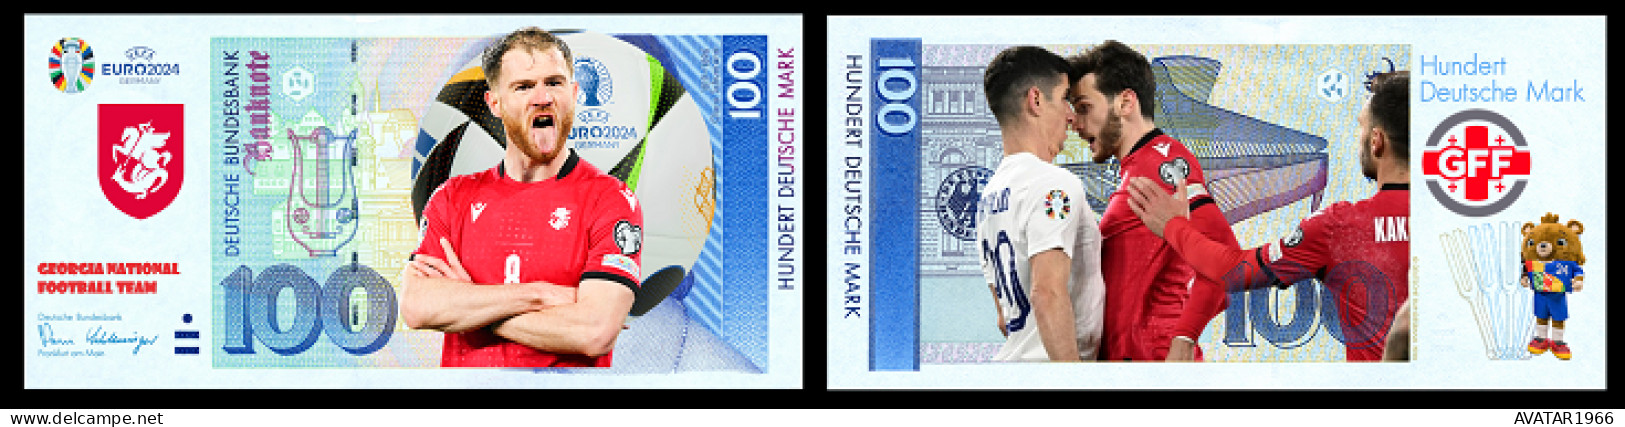 UEFA European Football Championship 2024 qualified country   Georgia 8 pieces Germany fantasy paper money